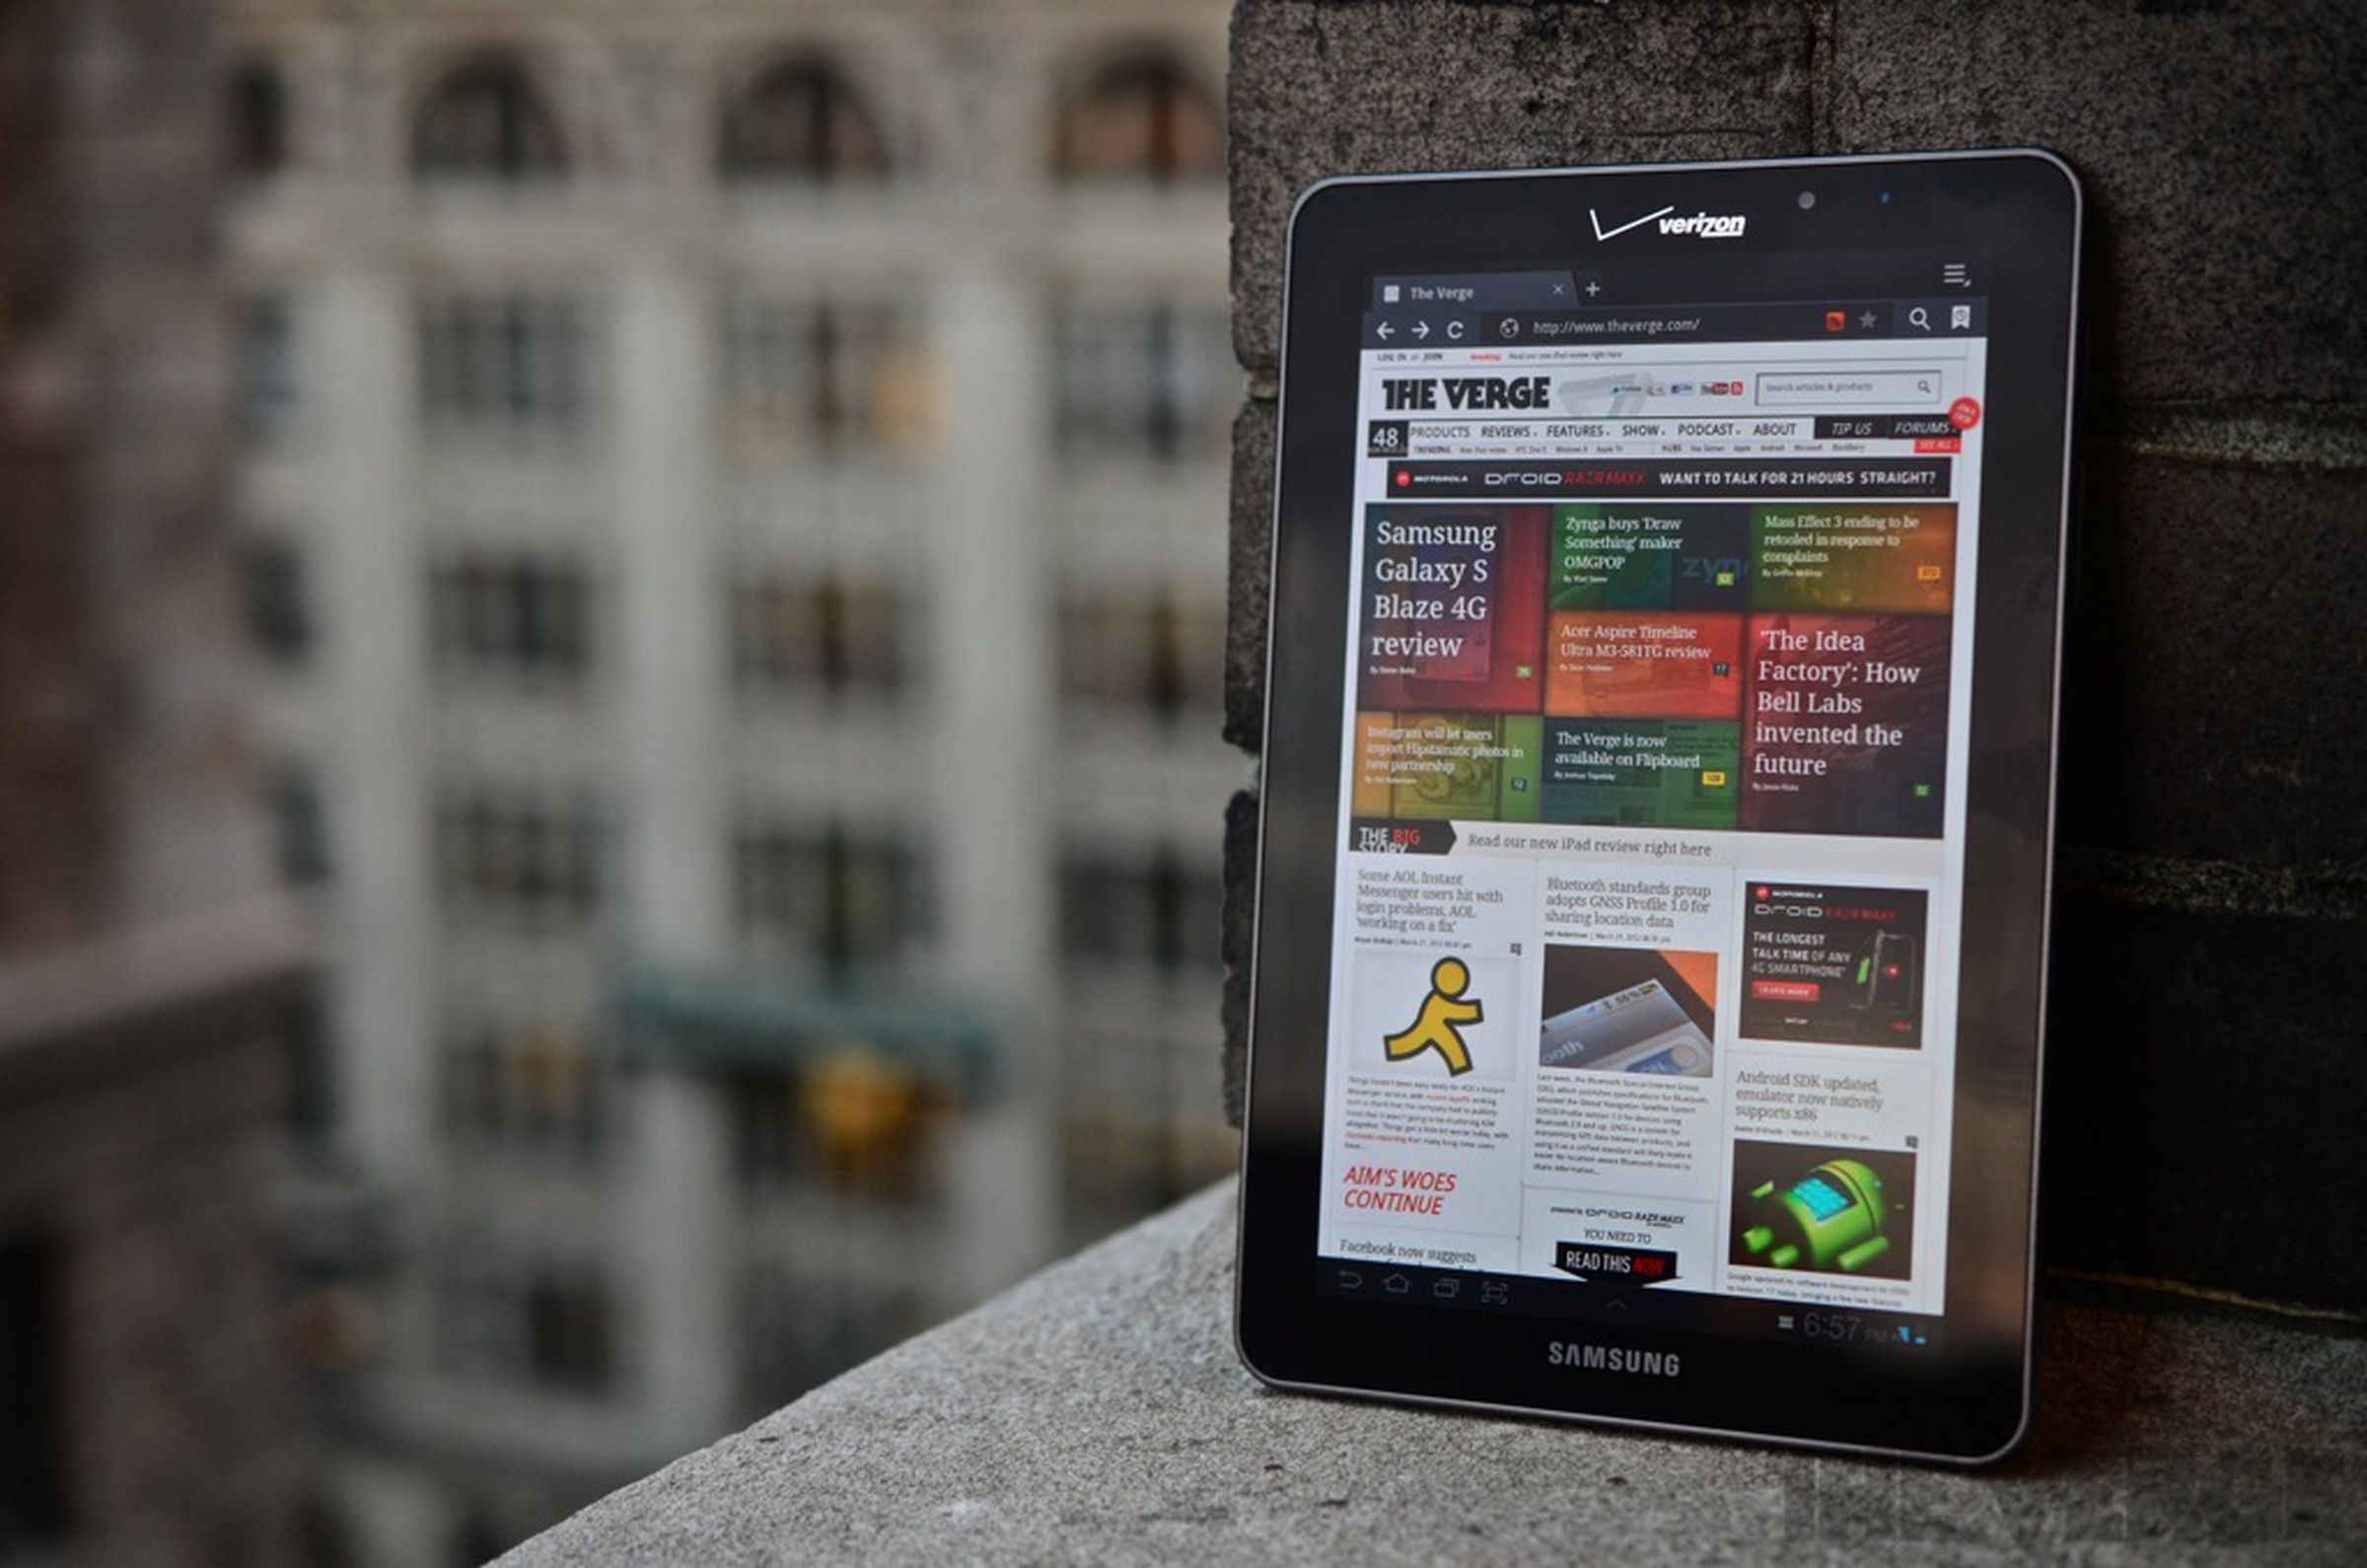 Samsung Galaxy Tab 7.7 for Verizon review pictures